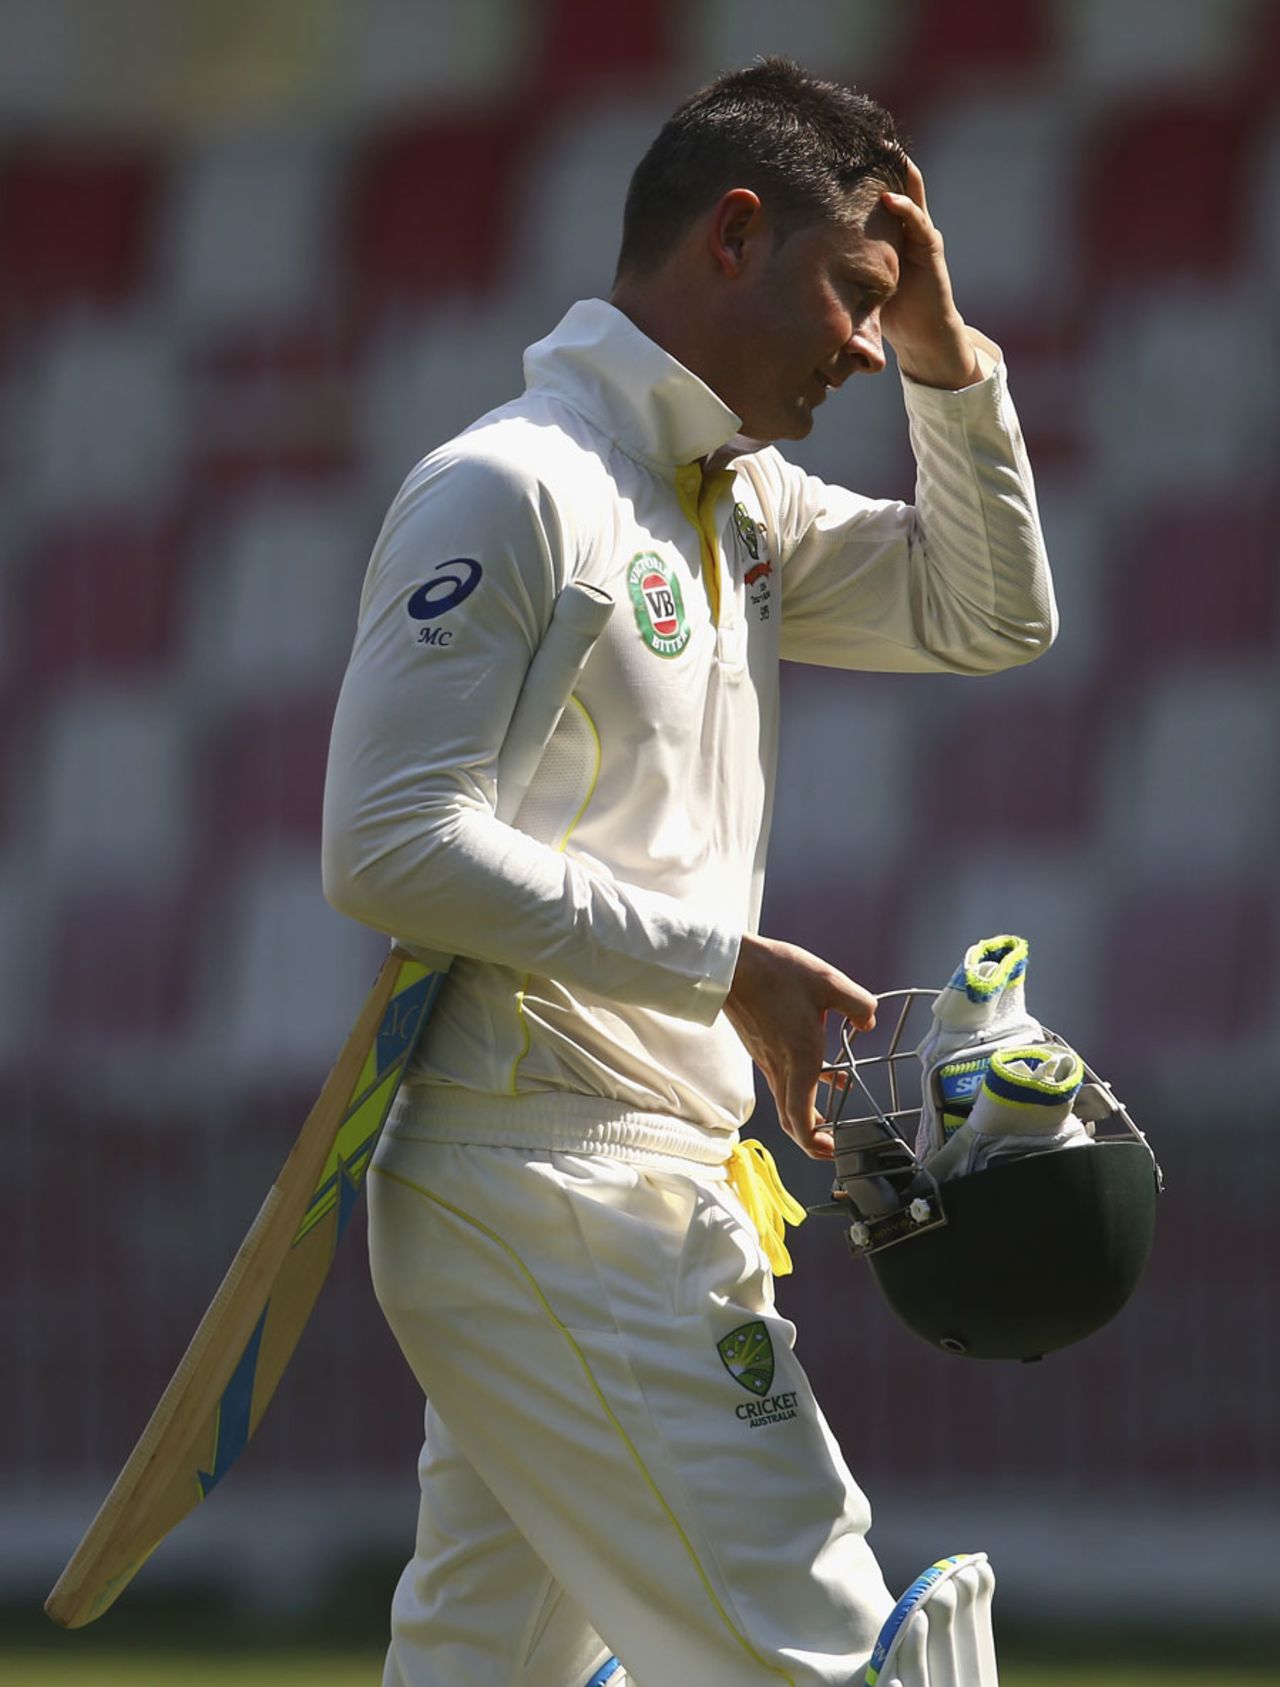 Michael Clarke was bowled for 5, Pakistan A v Australians, tour match, Sharjah, 4th day, October 18, 2014